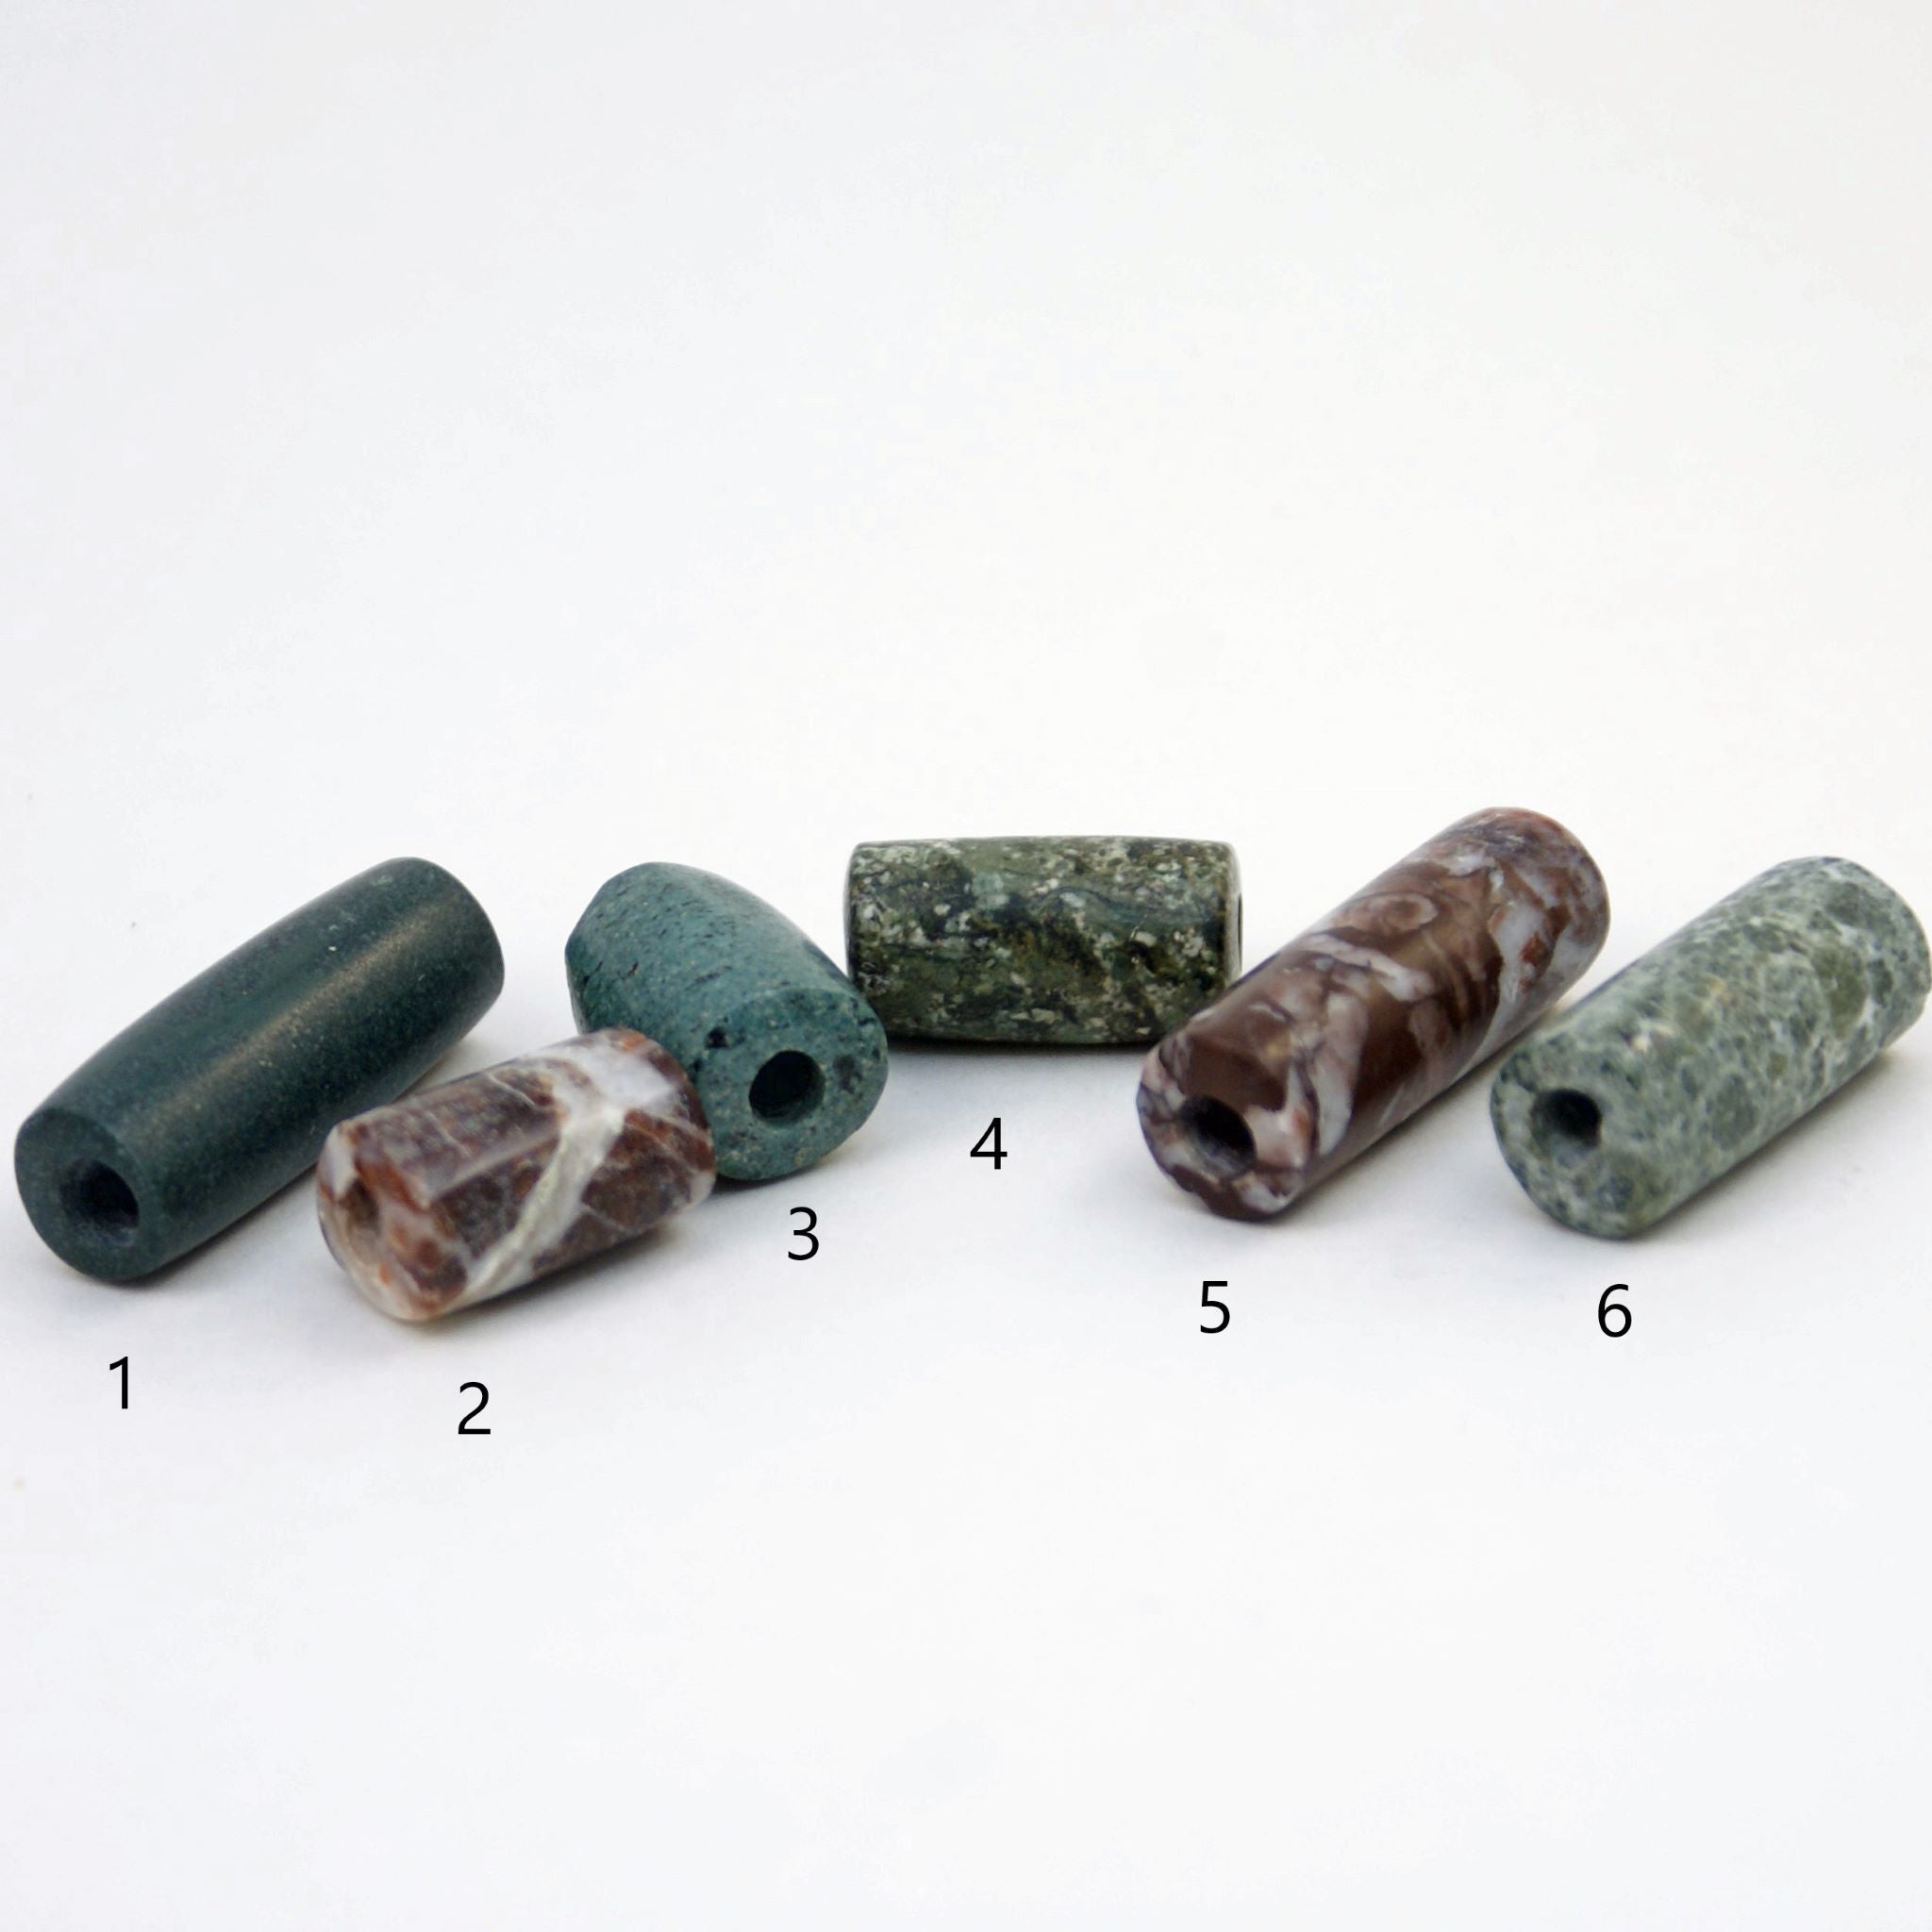 5 tube beads cut from Costa Rican stone